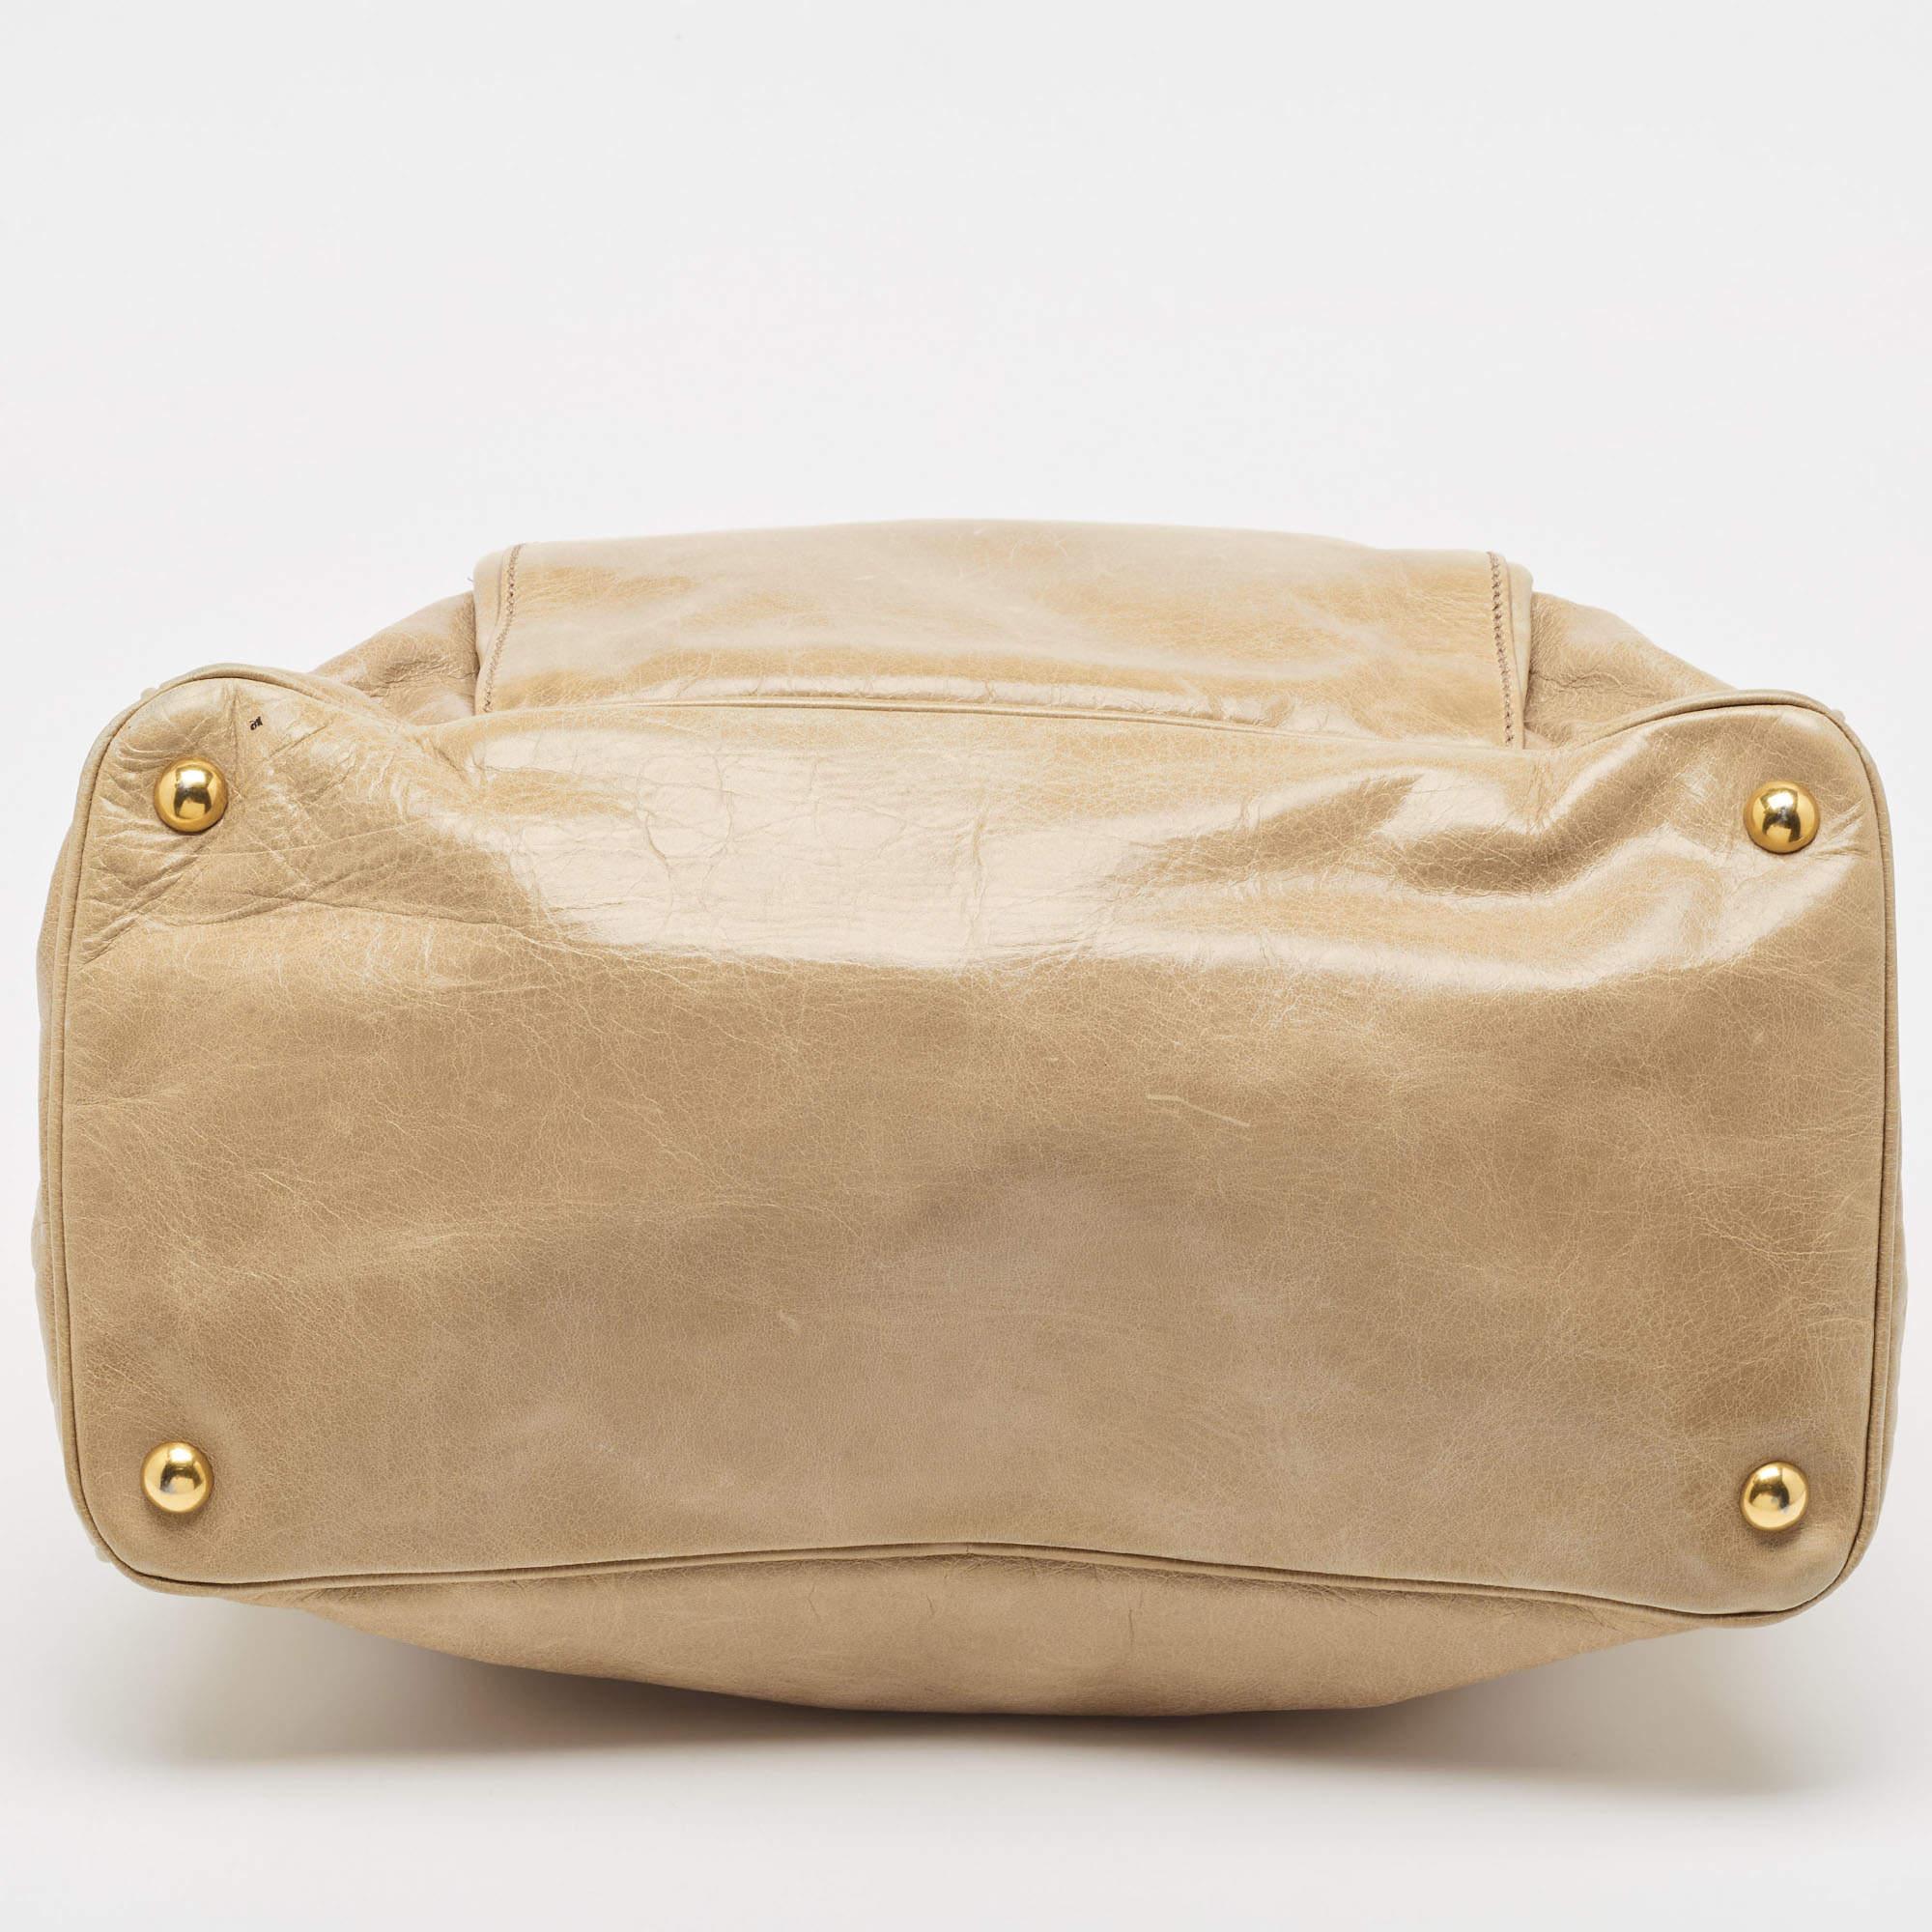 Miu Miu Beige Leather Front Pocket Tote For Sale 2